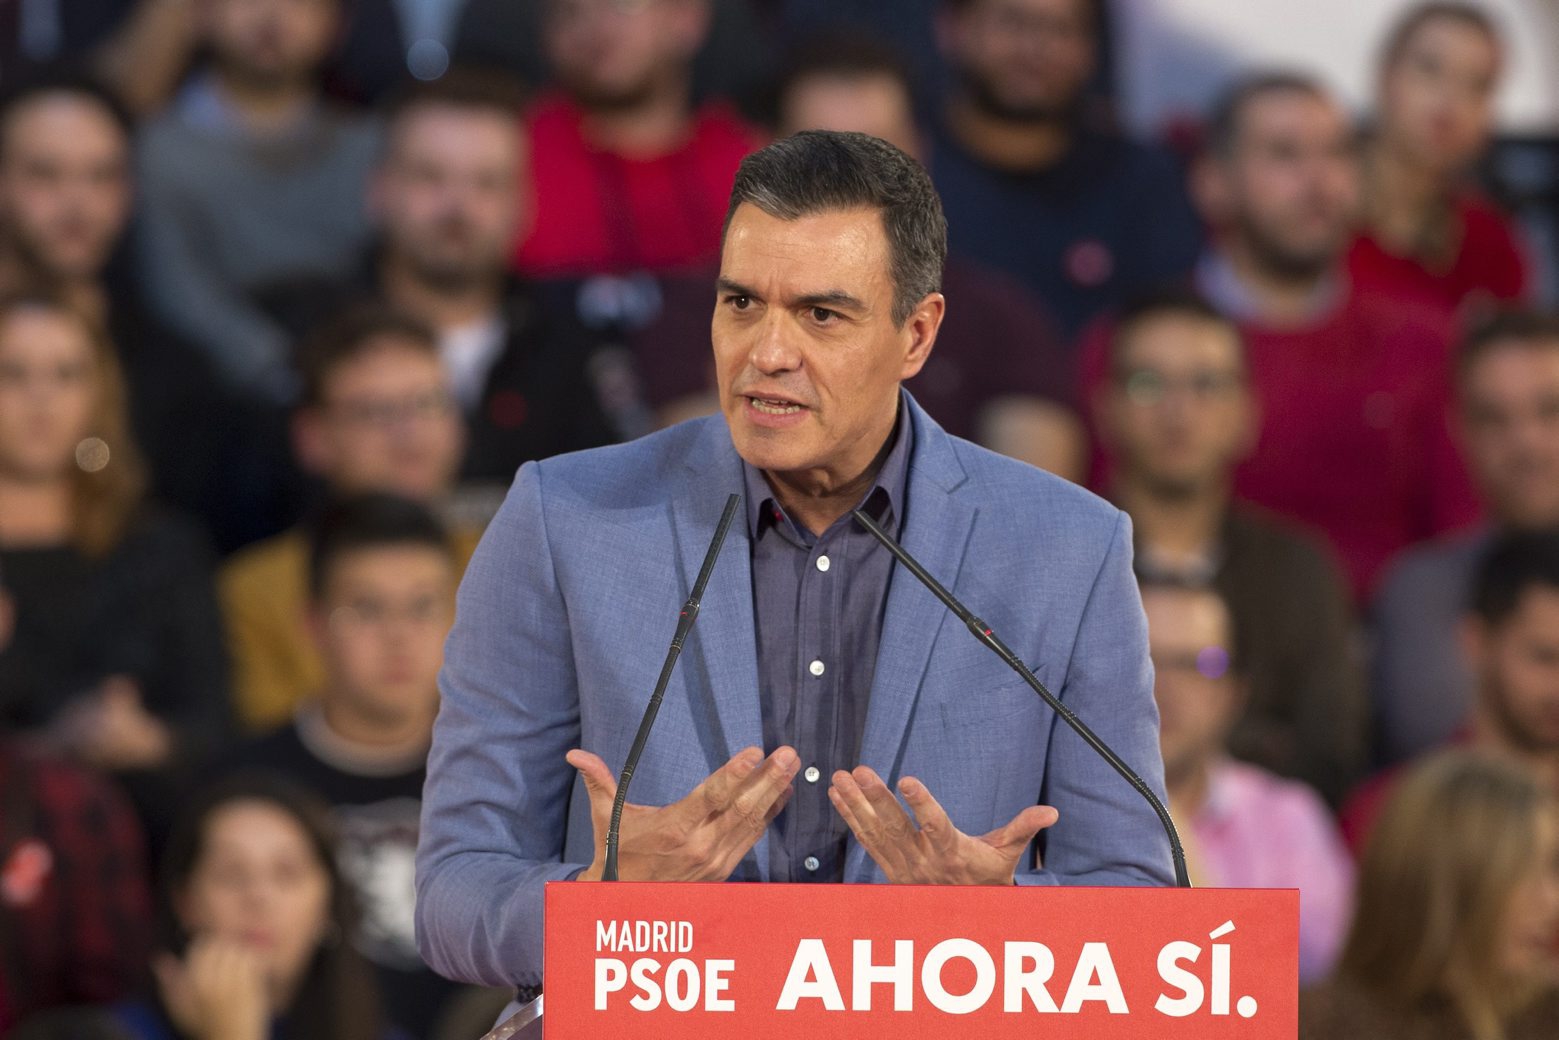 Spain's caretaker Prime Minister and socialist candidate Pedro Sanchez makes a speech during the last day of campaign rallies in Alcala de Henares, Spain, Friday Nov. 8, 2019. Spaniards are voting Sunday for the fourth time in as many years to elect the prime minister who will face a renewed Catalan independence bid that has boosted support for the far-right elsewhere in the country. (AP Photo/Paul White) Spain Election